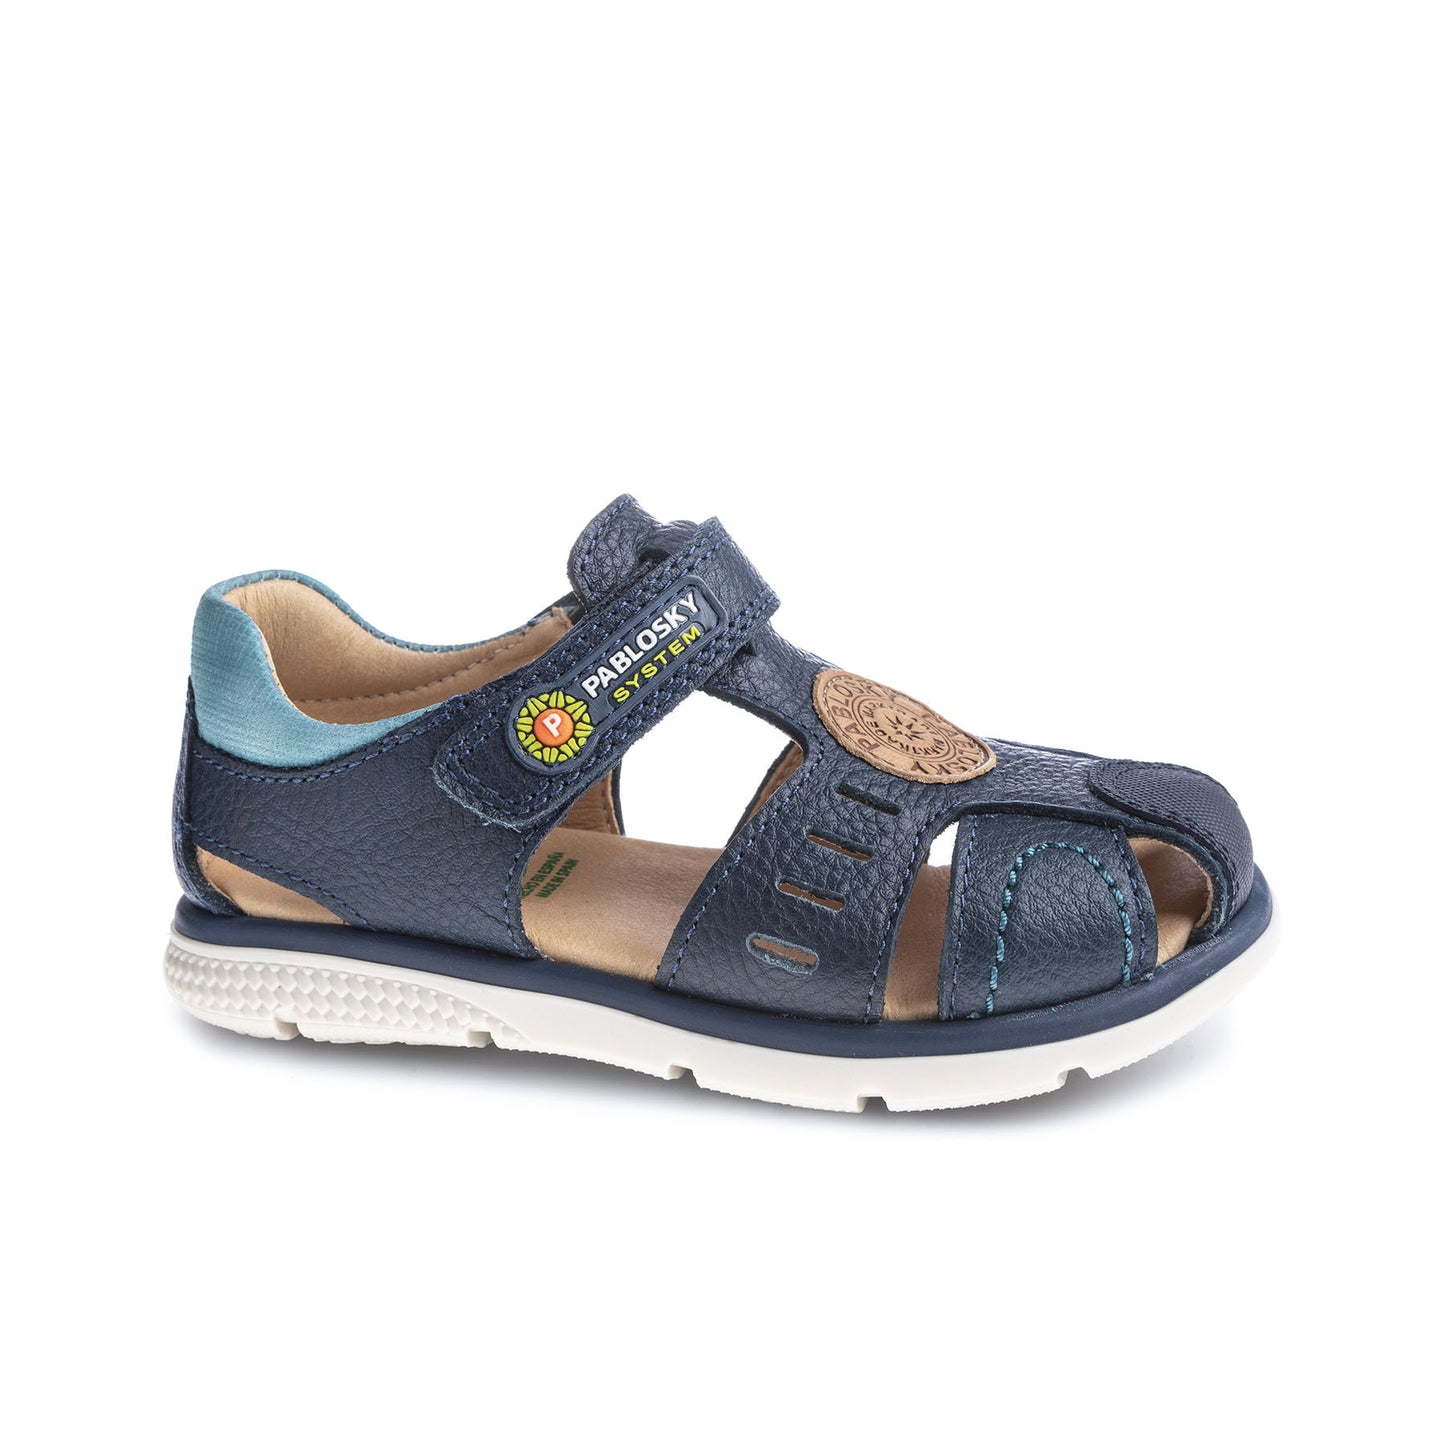 Pablosky Leather Sandals / 514025